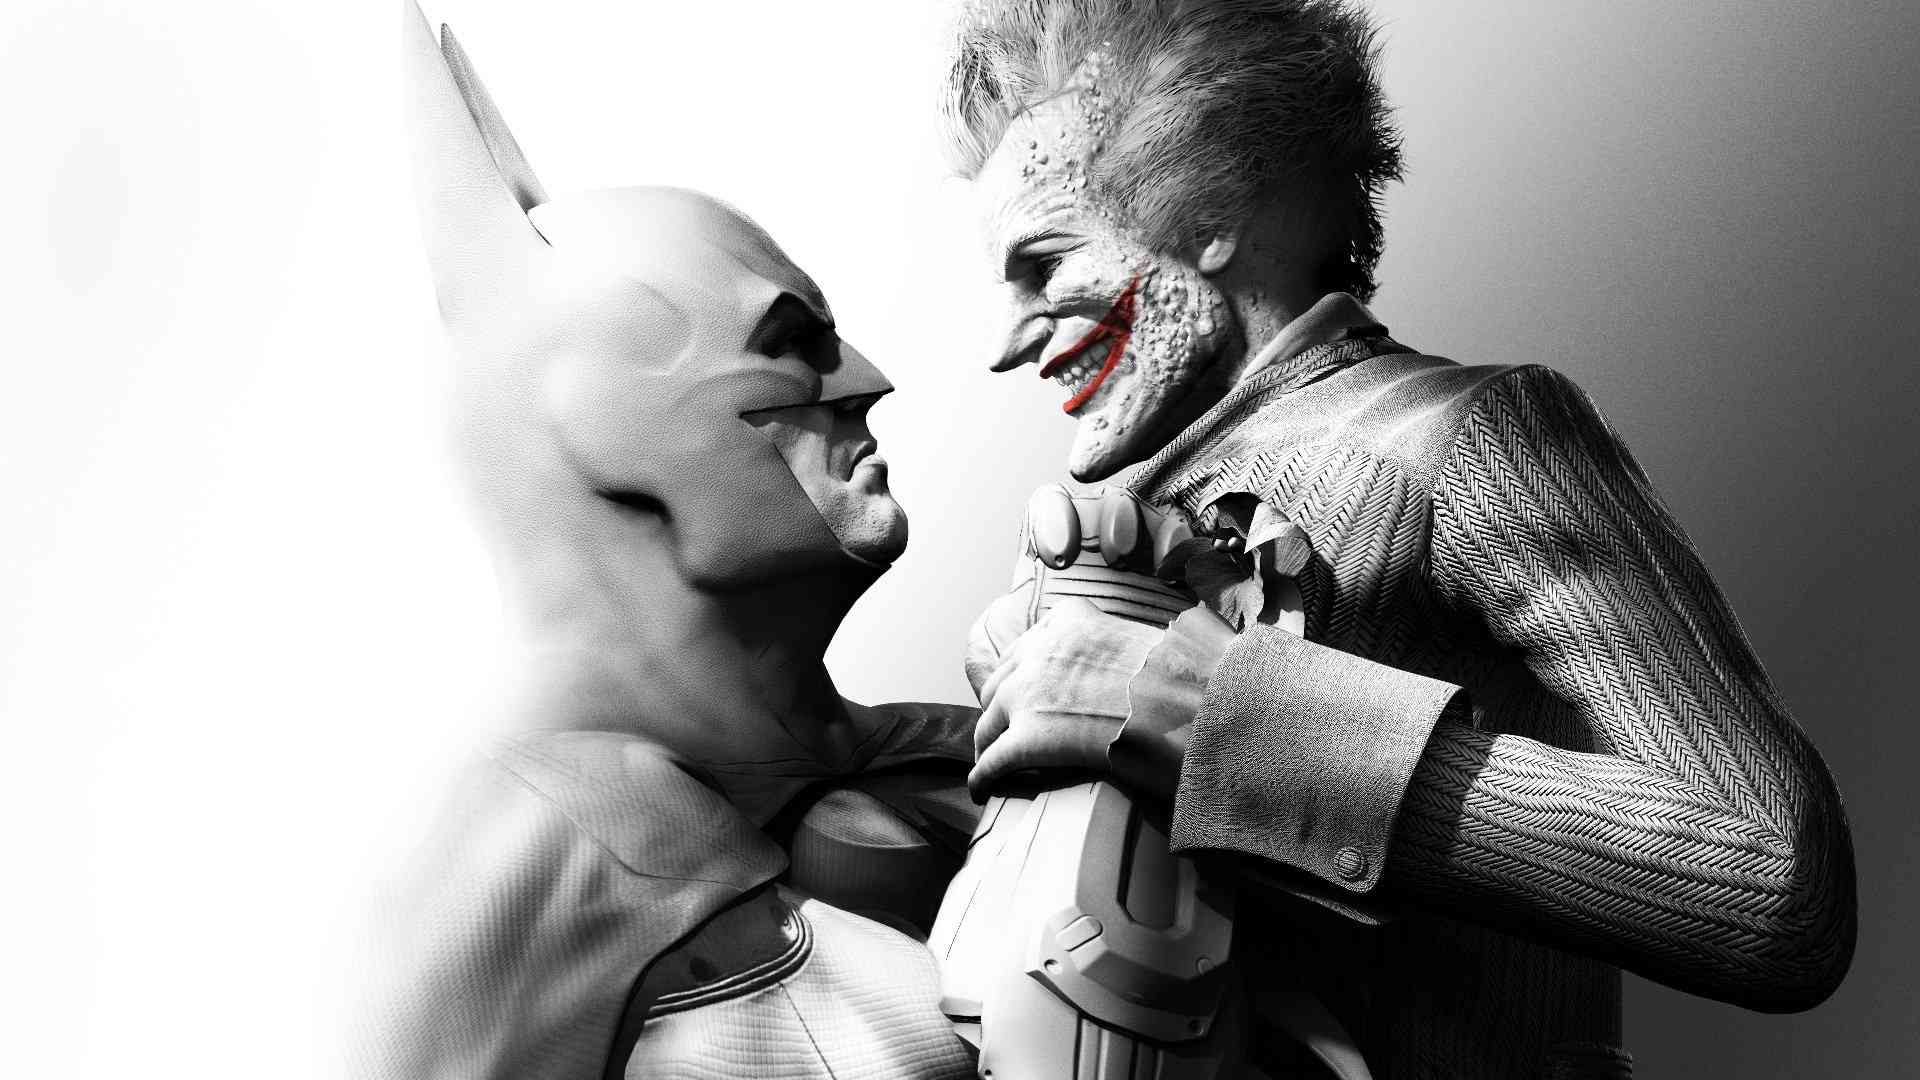 E3 2013: Batman: Arkham Origins Preview - More of What We Love With a ...